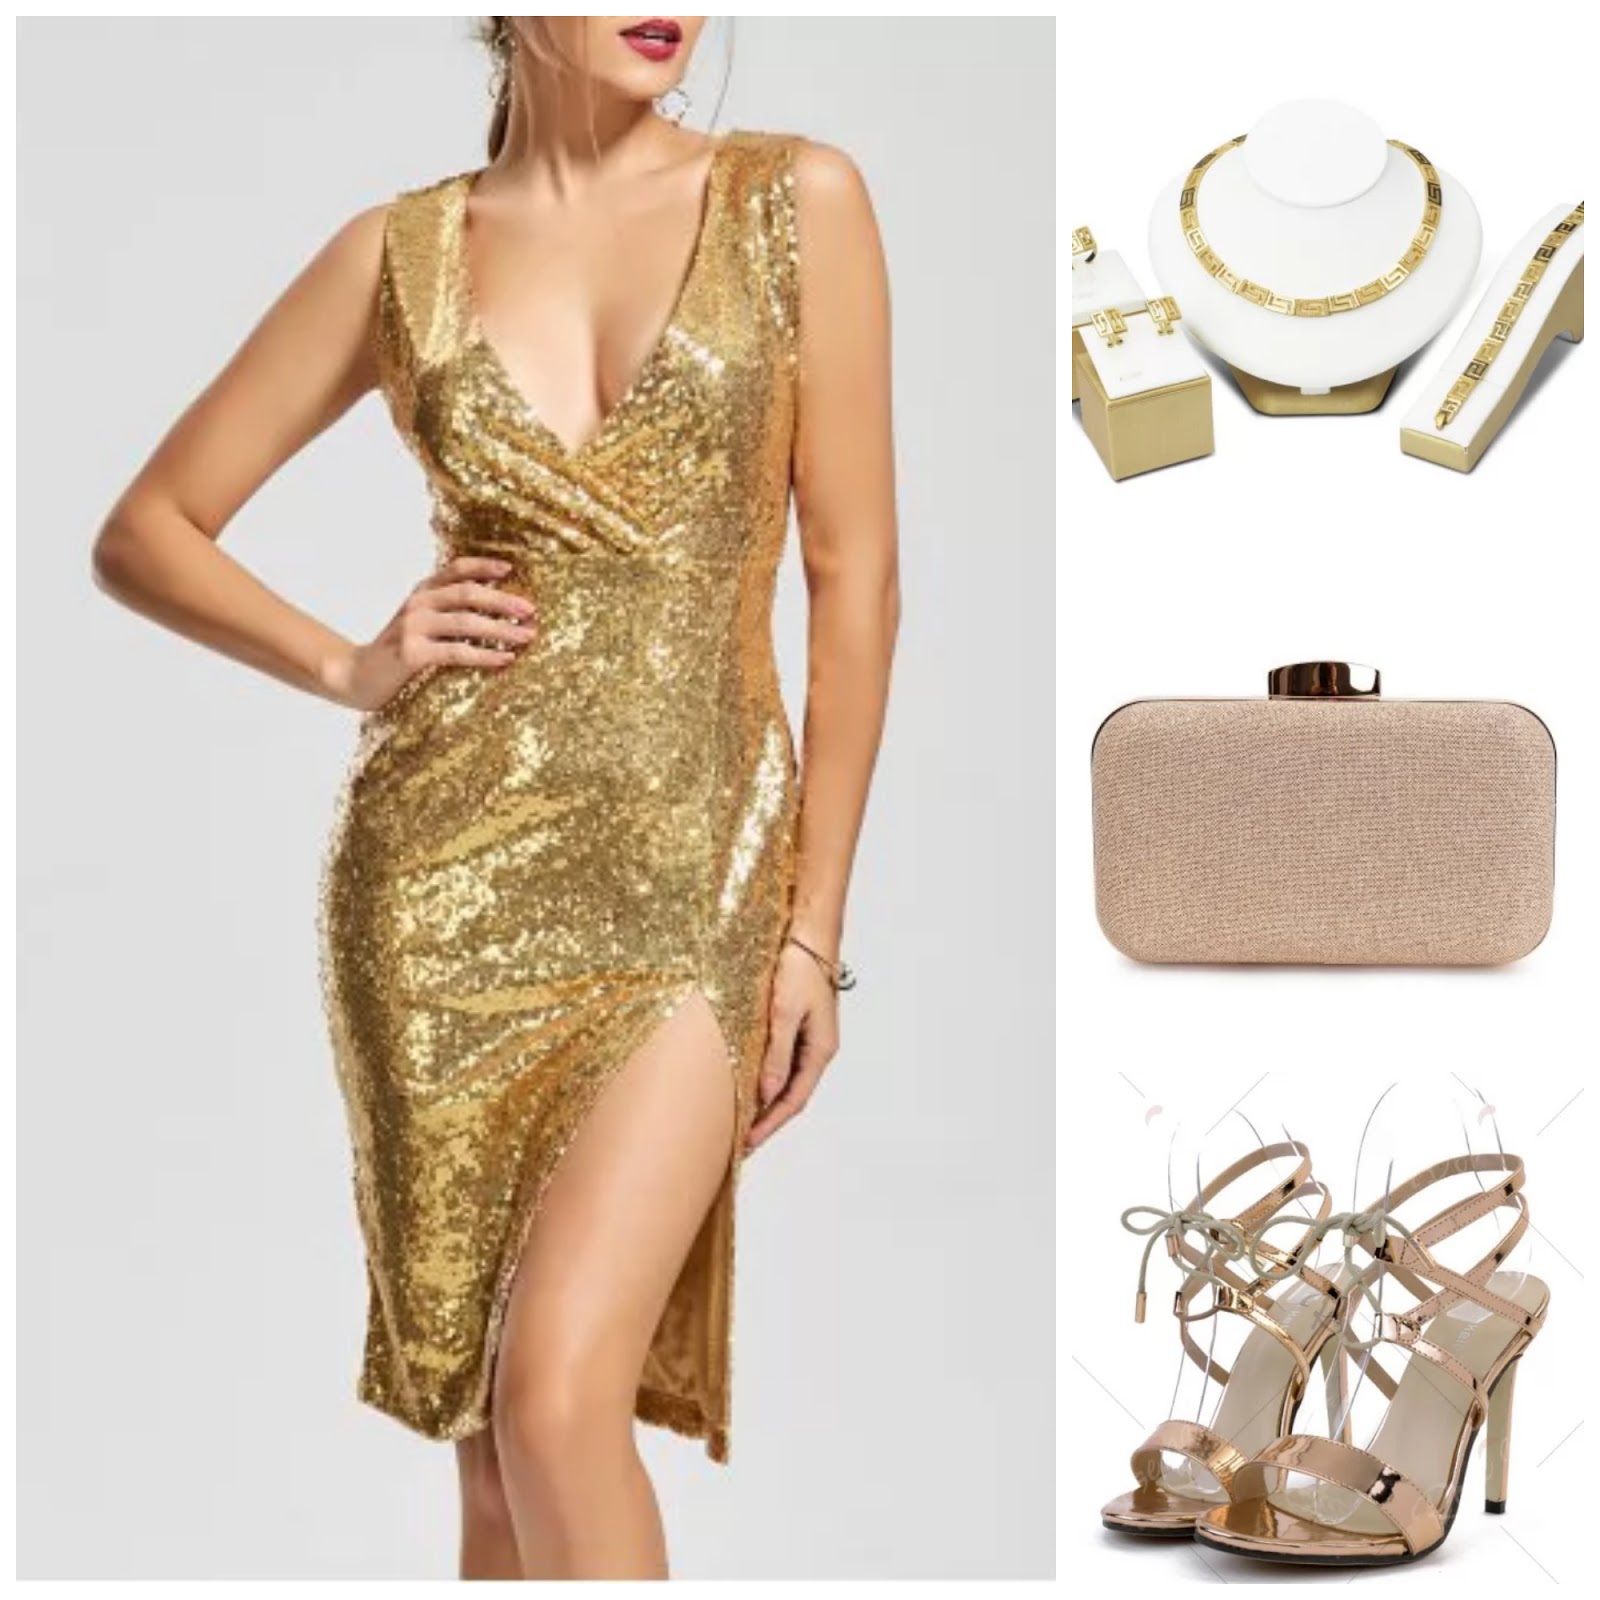 Its Miss Ivana: SEQUIN BODYCON DRESS-GOLD GODDESS OUTFIT